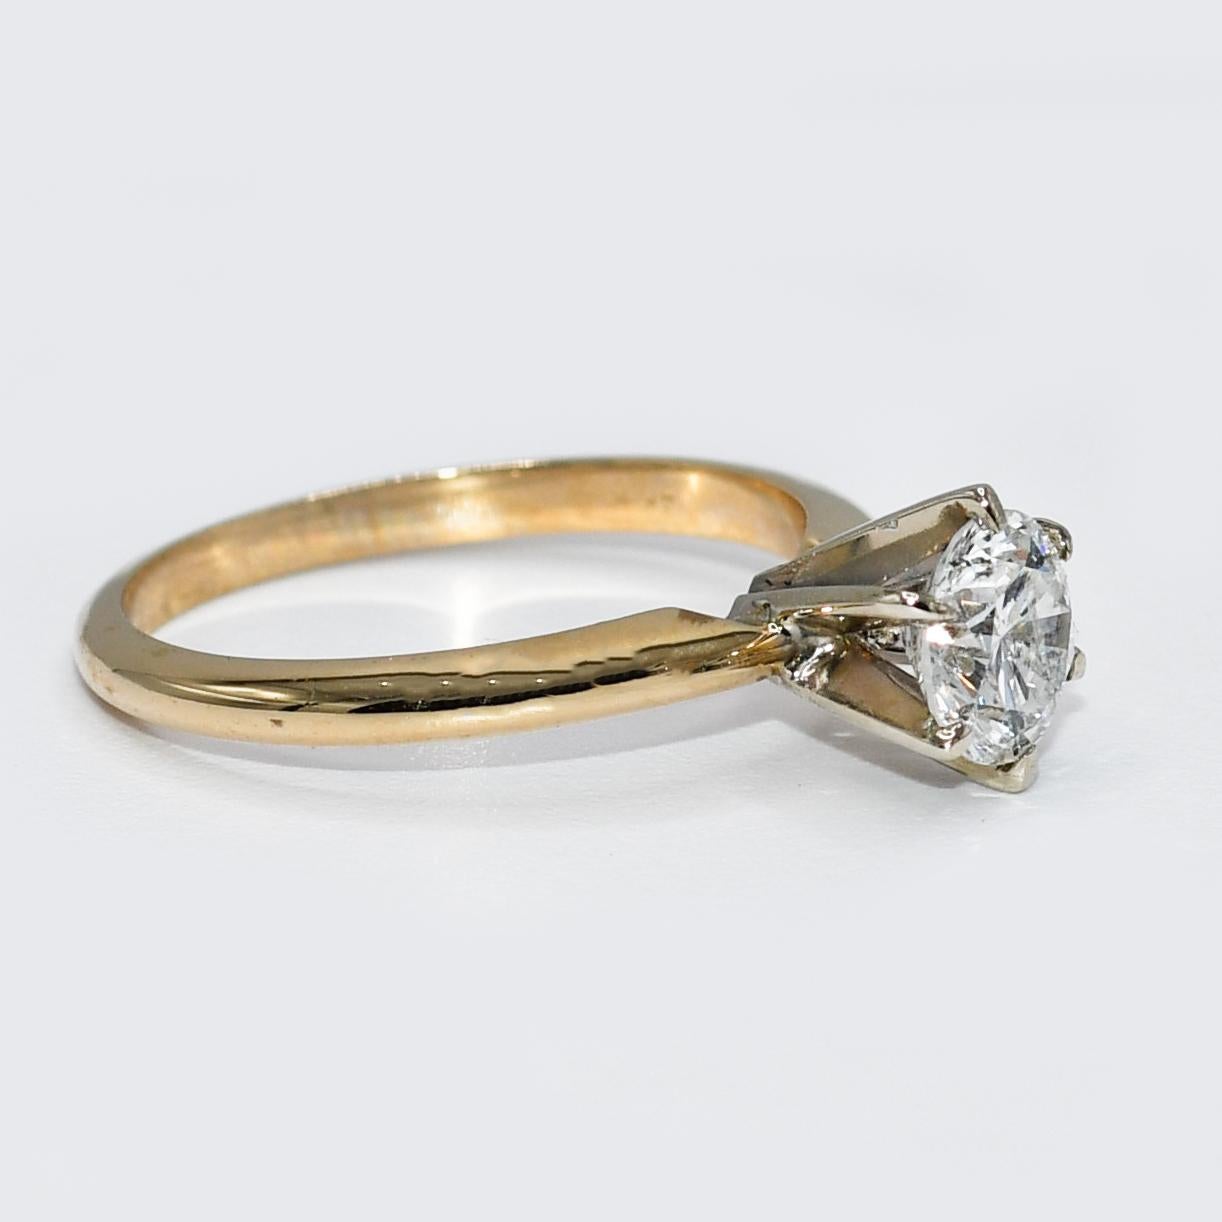 14K Yellow Gold RBC Diamond Solitaire Ring G-H, i1 0.97TDW, 2.8gr

Ladies diamond solitaire ring with 14k yellow gold setting.
Stamped 14k and weighs 2.7 grams.
The diamond is a round brilliant cut, weighing .97 carats, G to H color, i1 clarity,